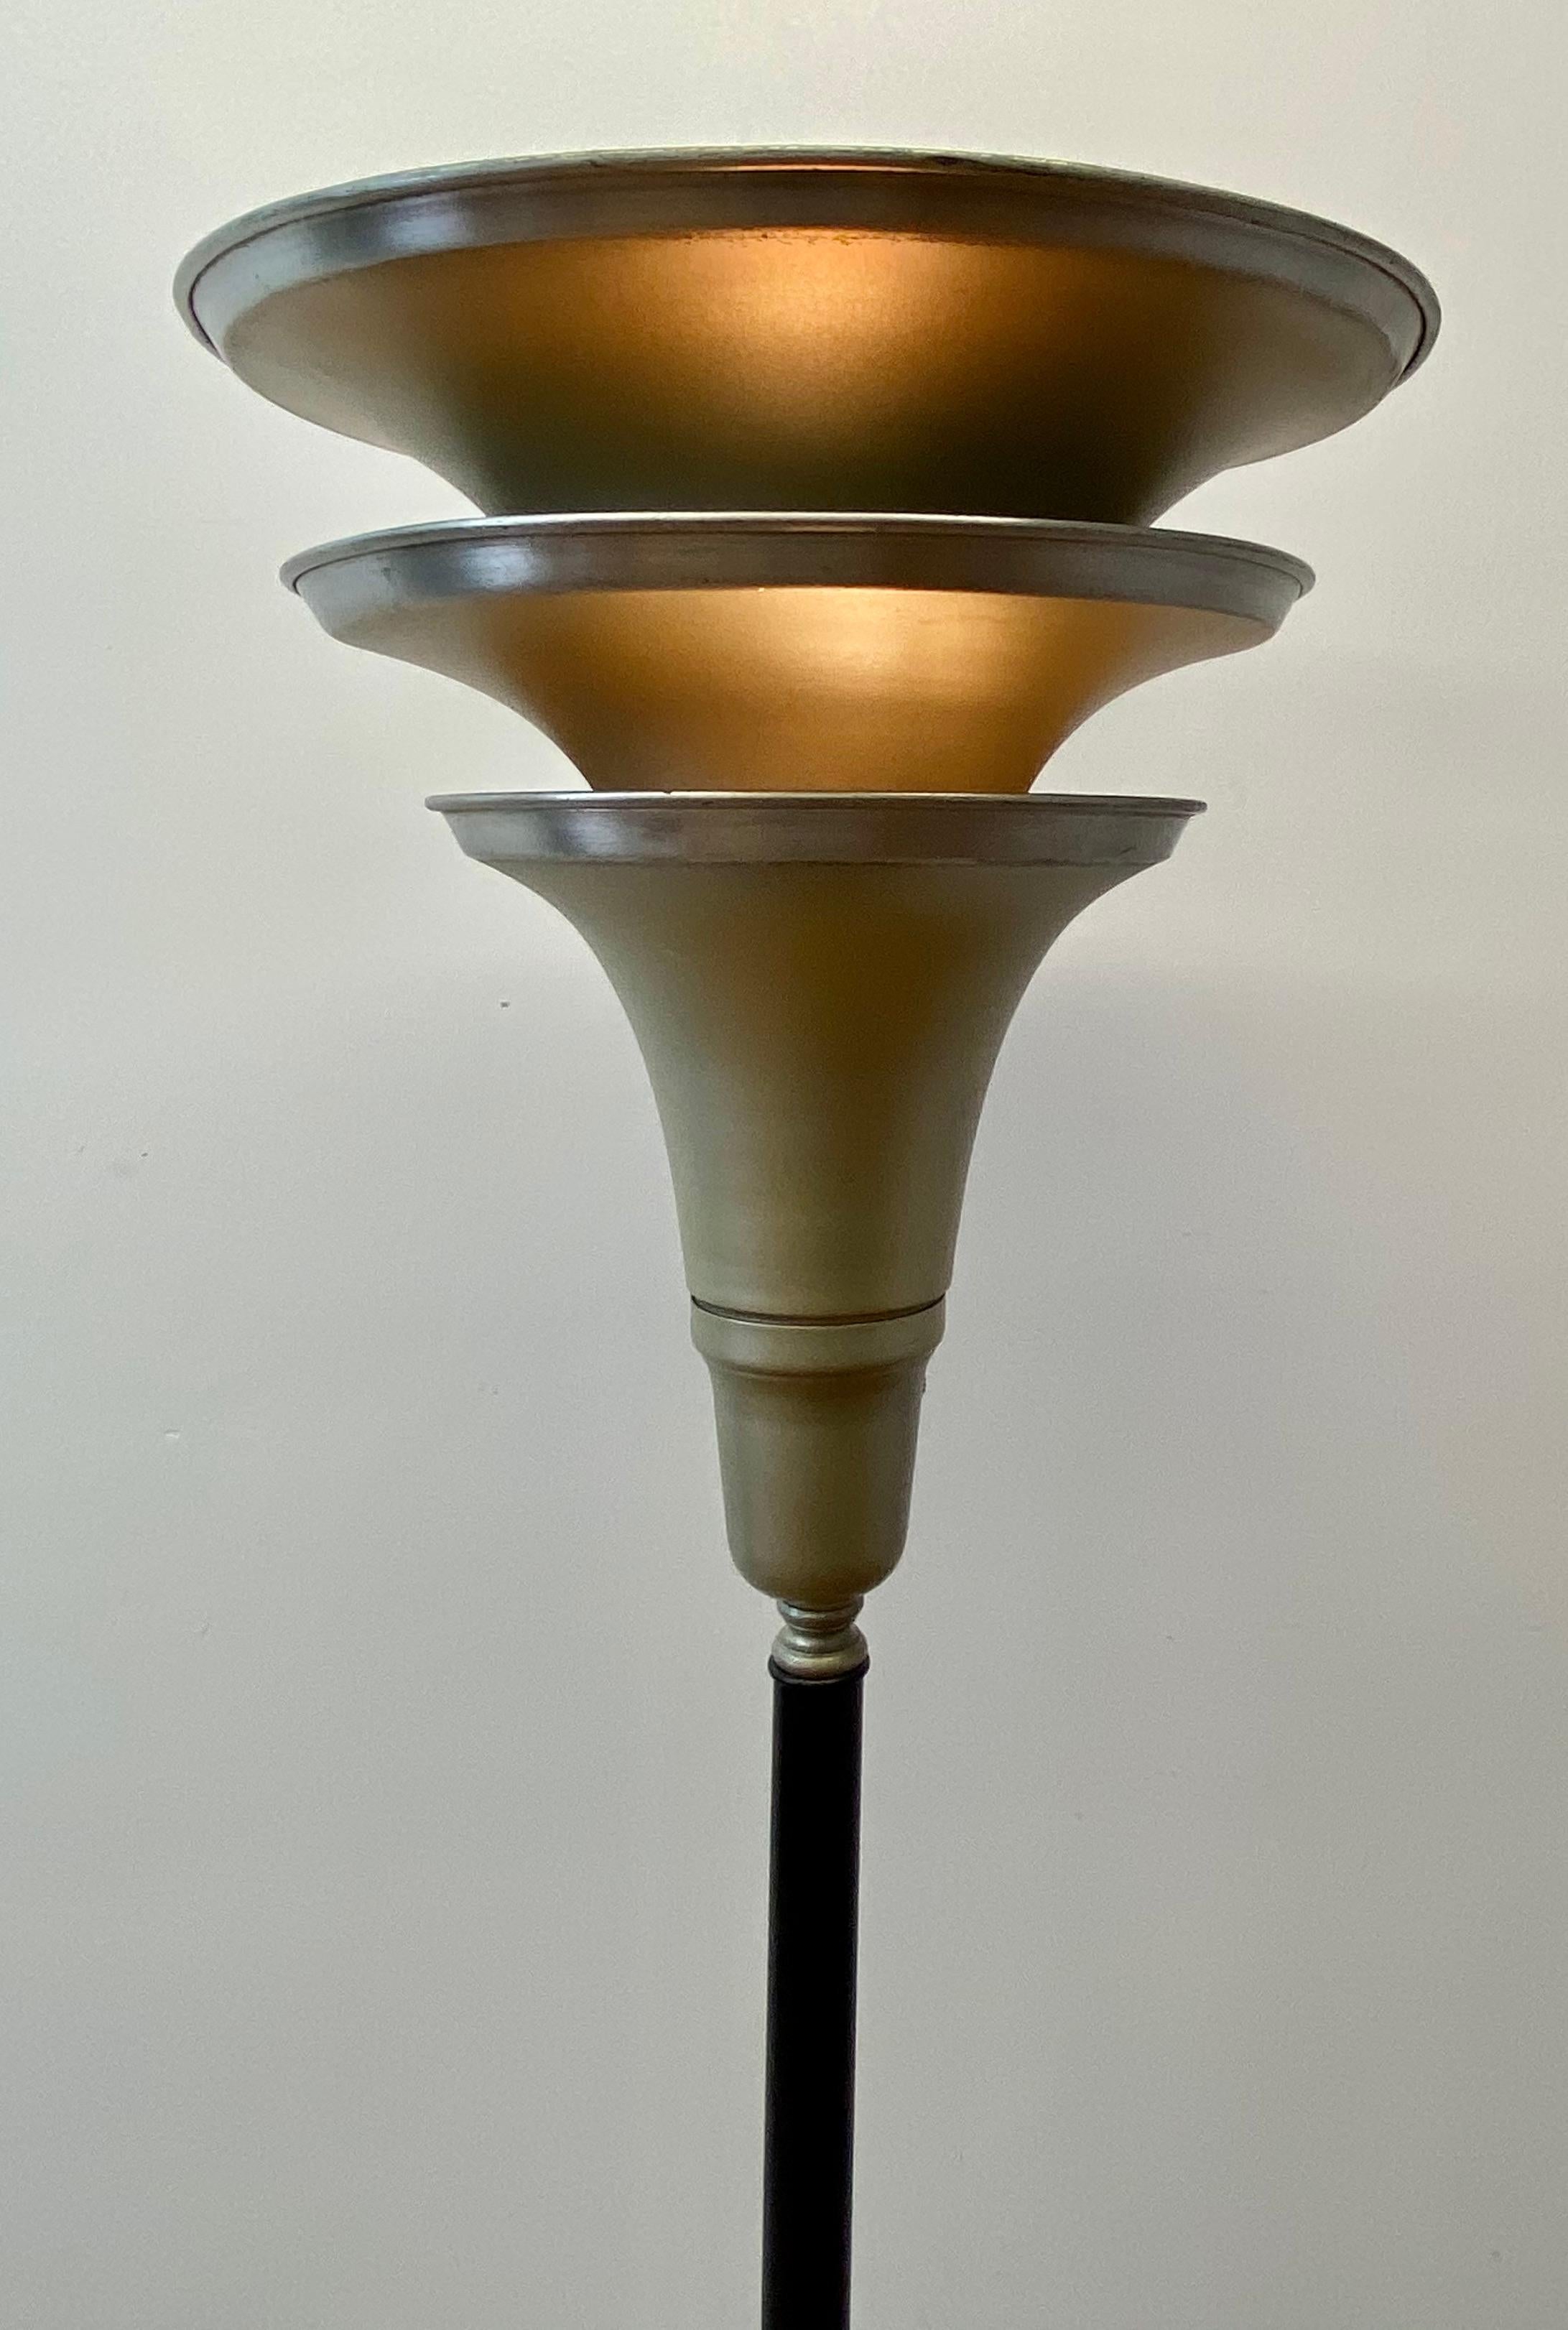 Art Deco aluminum free standing floor lamp, C.1940s

Classic 1940s Art Deco floor lamp

The aluminum base shows some dings and dents (please see images)

Measures: 10